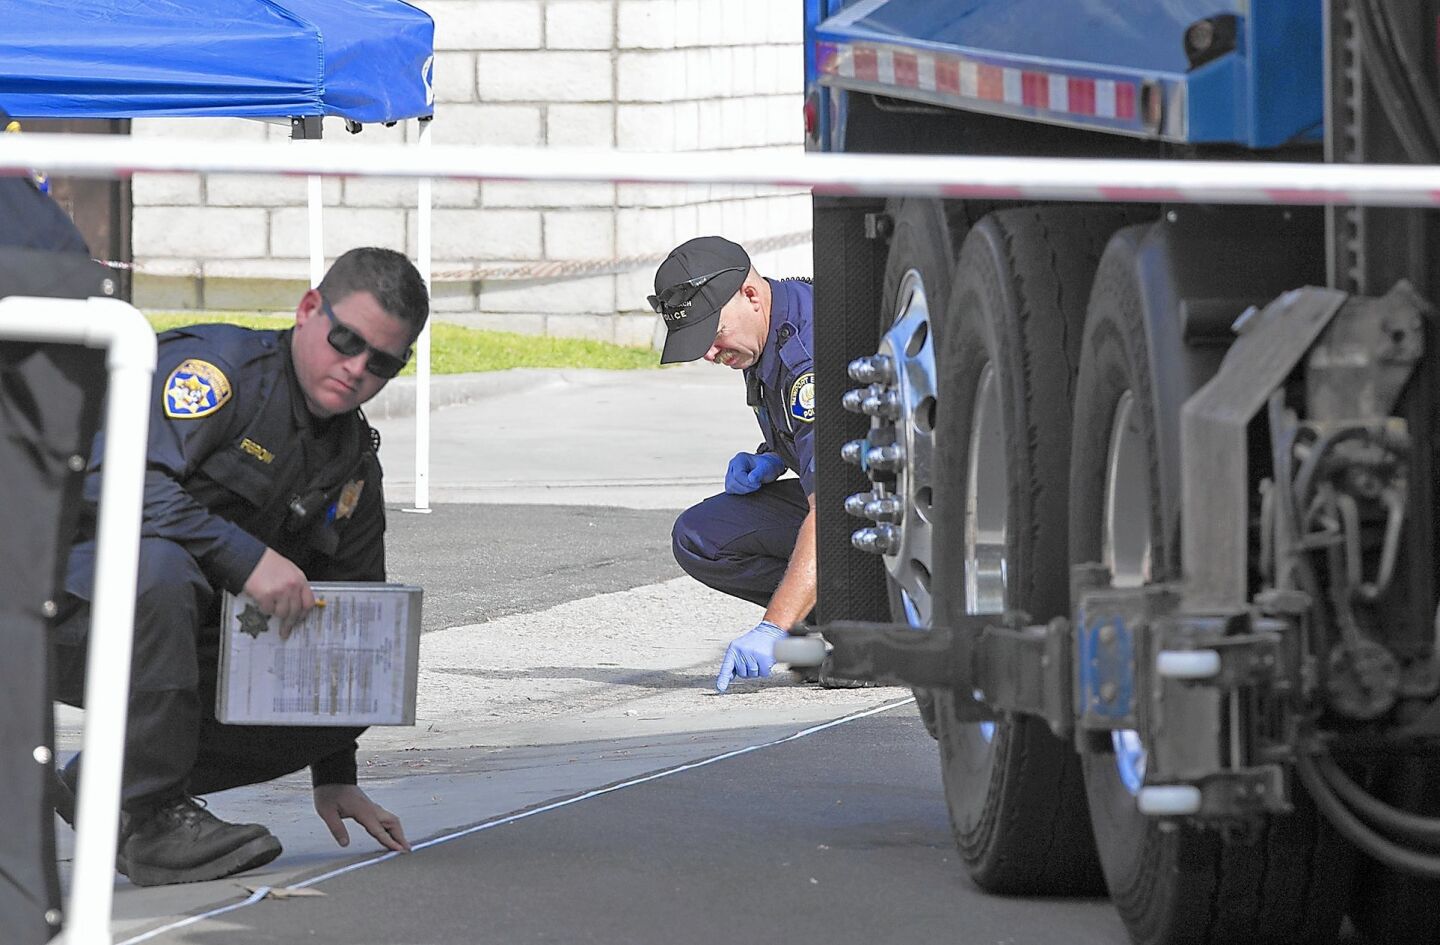 Investigators work the scene where a trash truck hit an 8-year-old boy who was pronounced dead at the scene at the corner of 15th Street and Michael Place in Newport Beach.